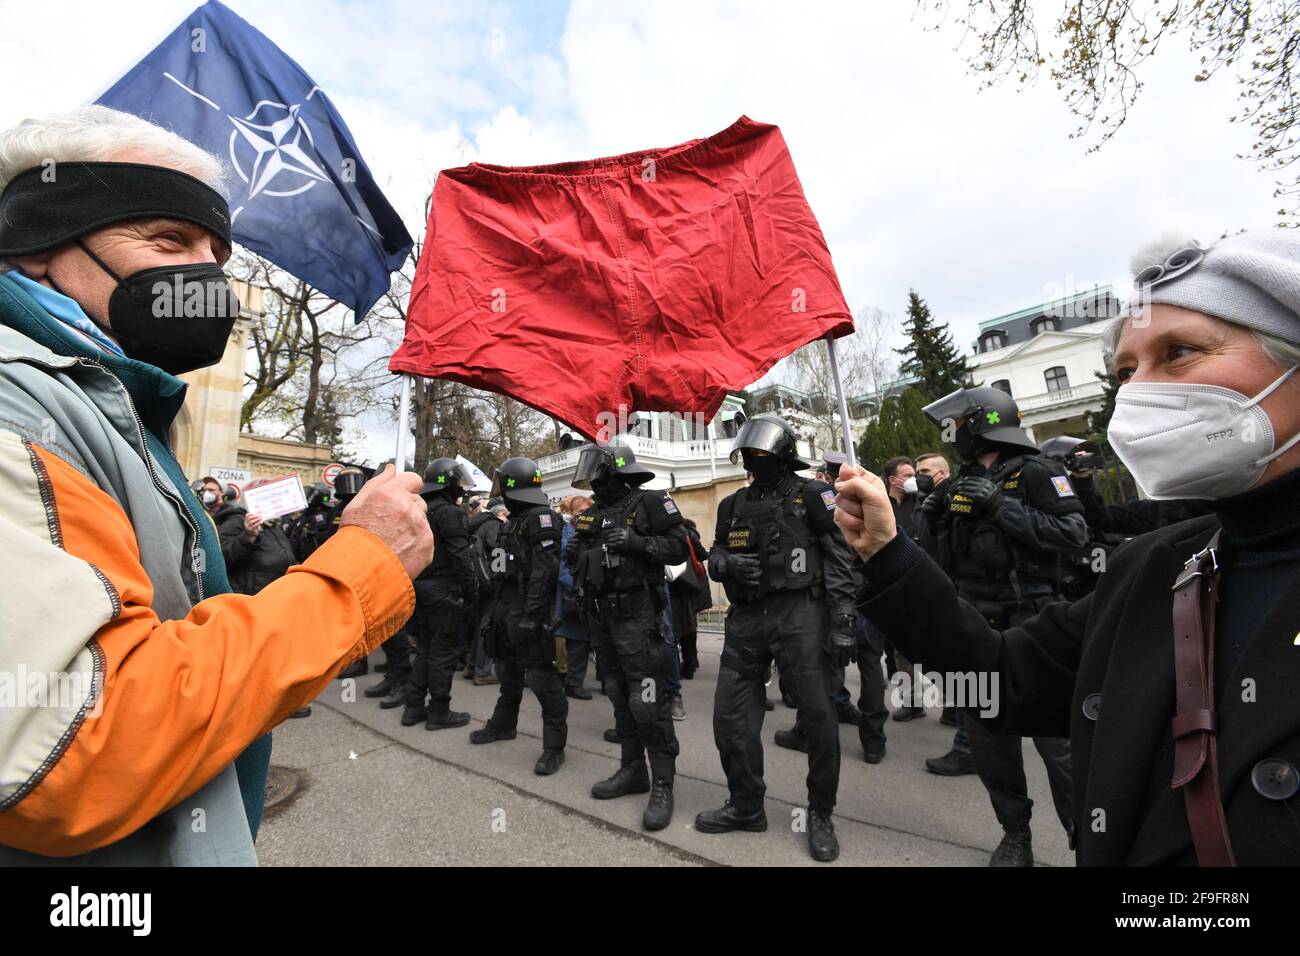 Prague, Czech Republic. 18th Apr, 2021. People protest outside the Russian Embassy in Prague, Czech Republic, April 18, 2021 against Putinist Russia and Russia's suspected involvement in an explosion in the Czech Vrbetice ammunition depot. Credit: Michaela Rihova/CTK Photo/Alamy Live News Stock Photo